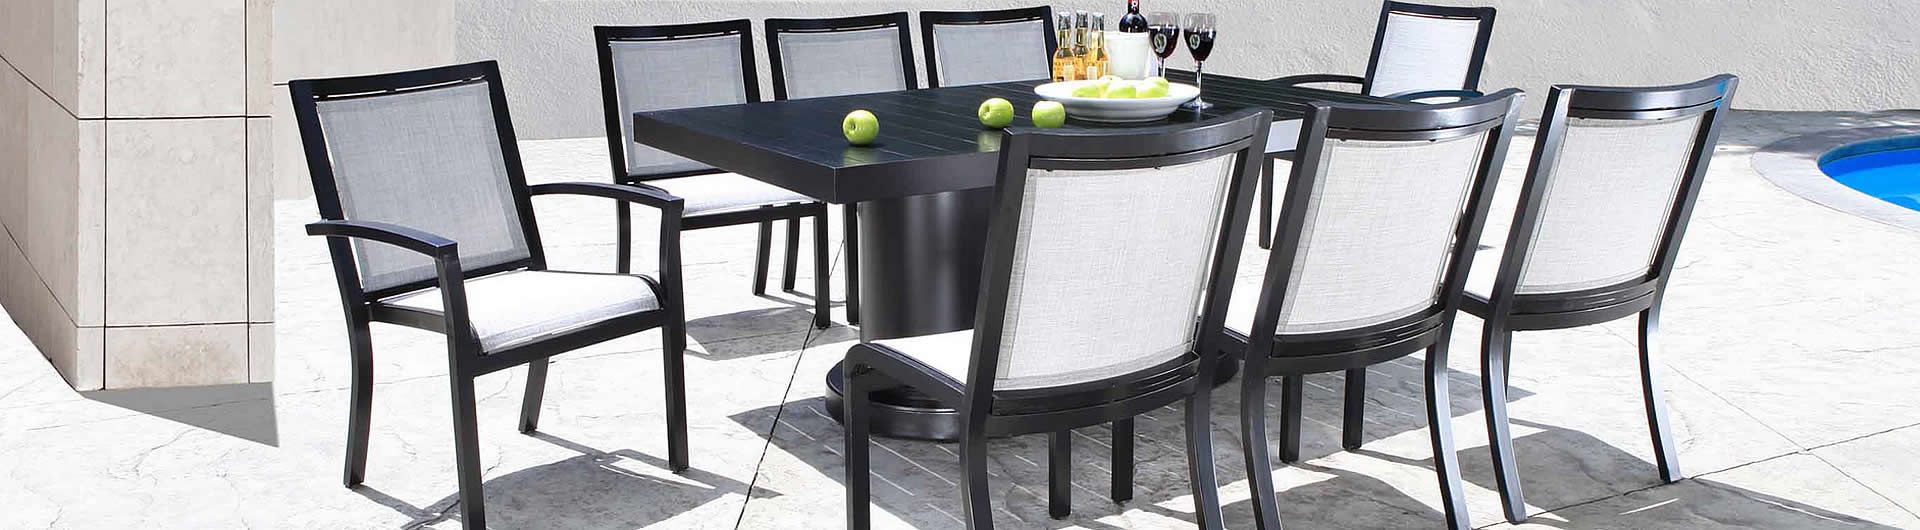 Millcroft Dining Collection